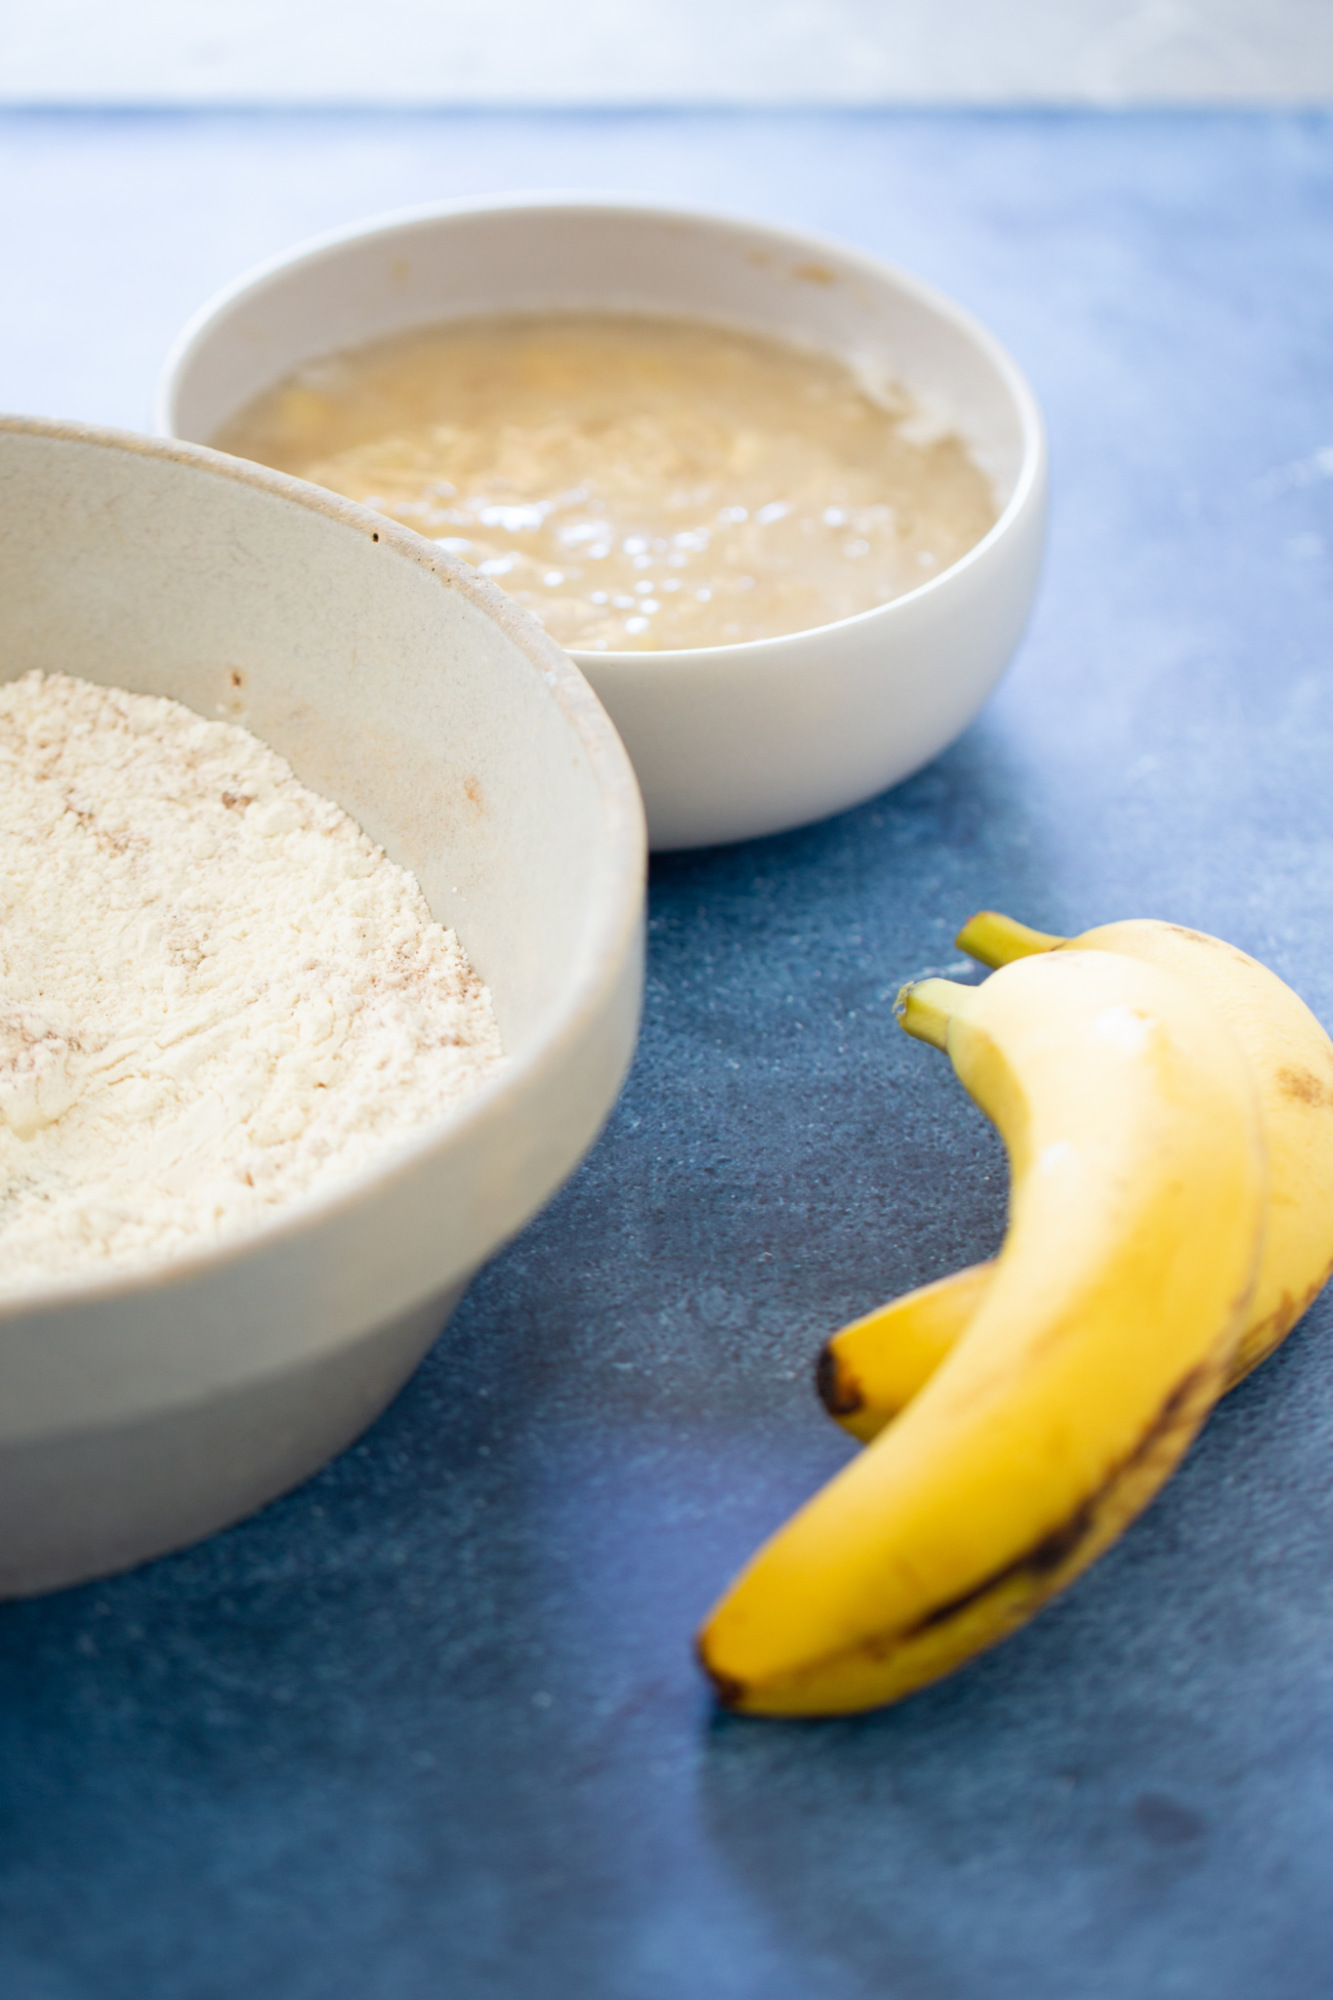 ingredients for baking with bananas